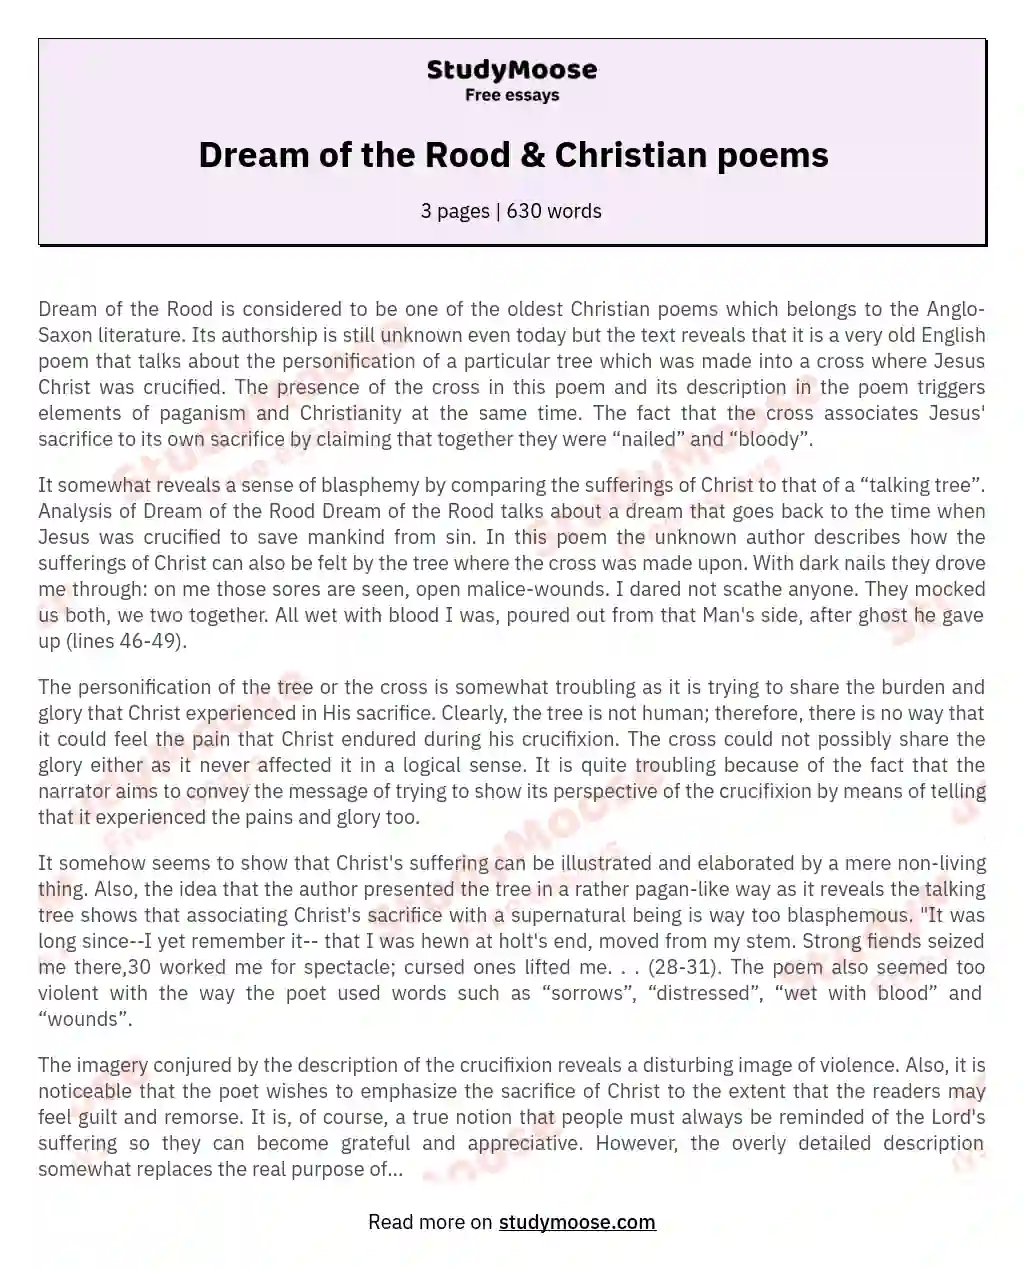 Dream of the Rood &amp; Christian poems essay